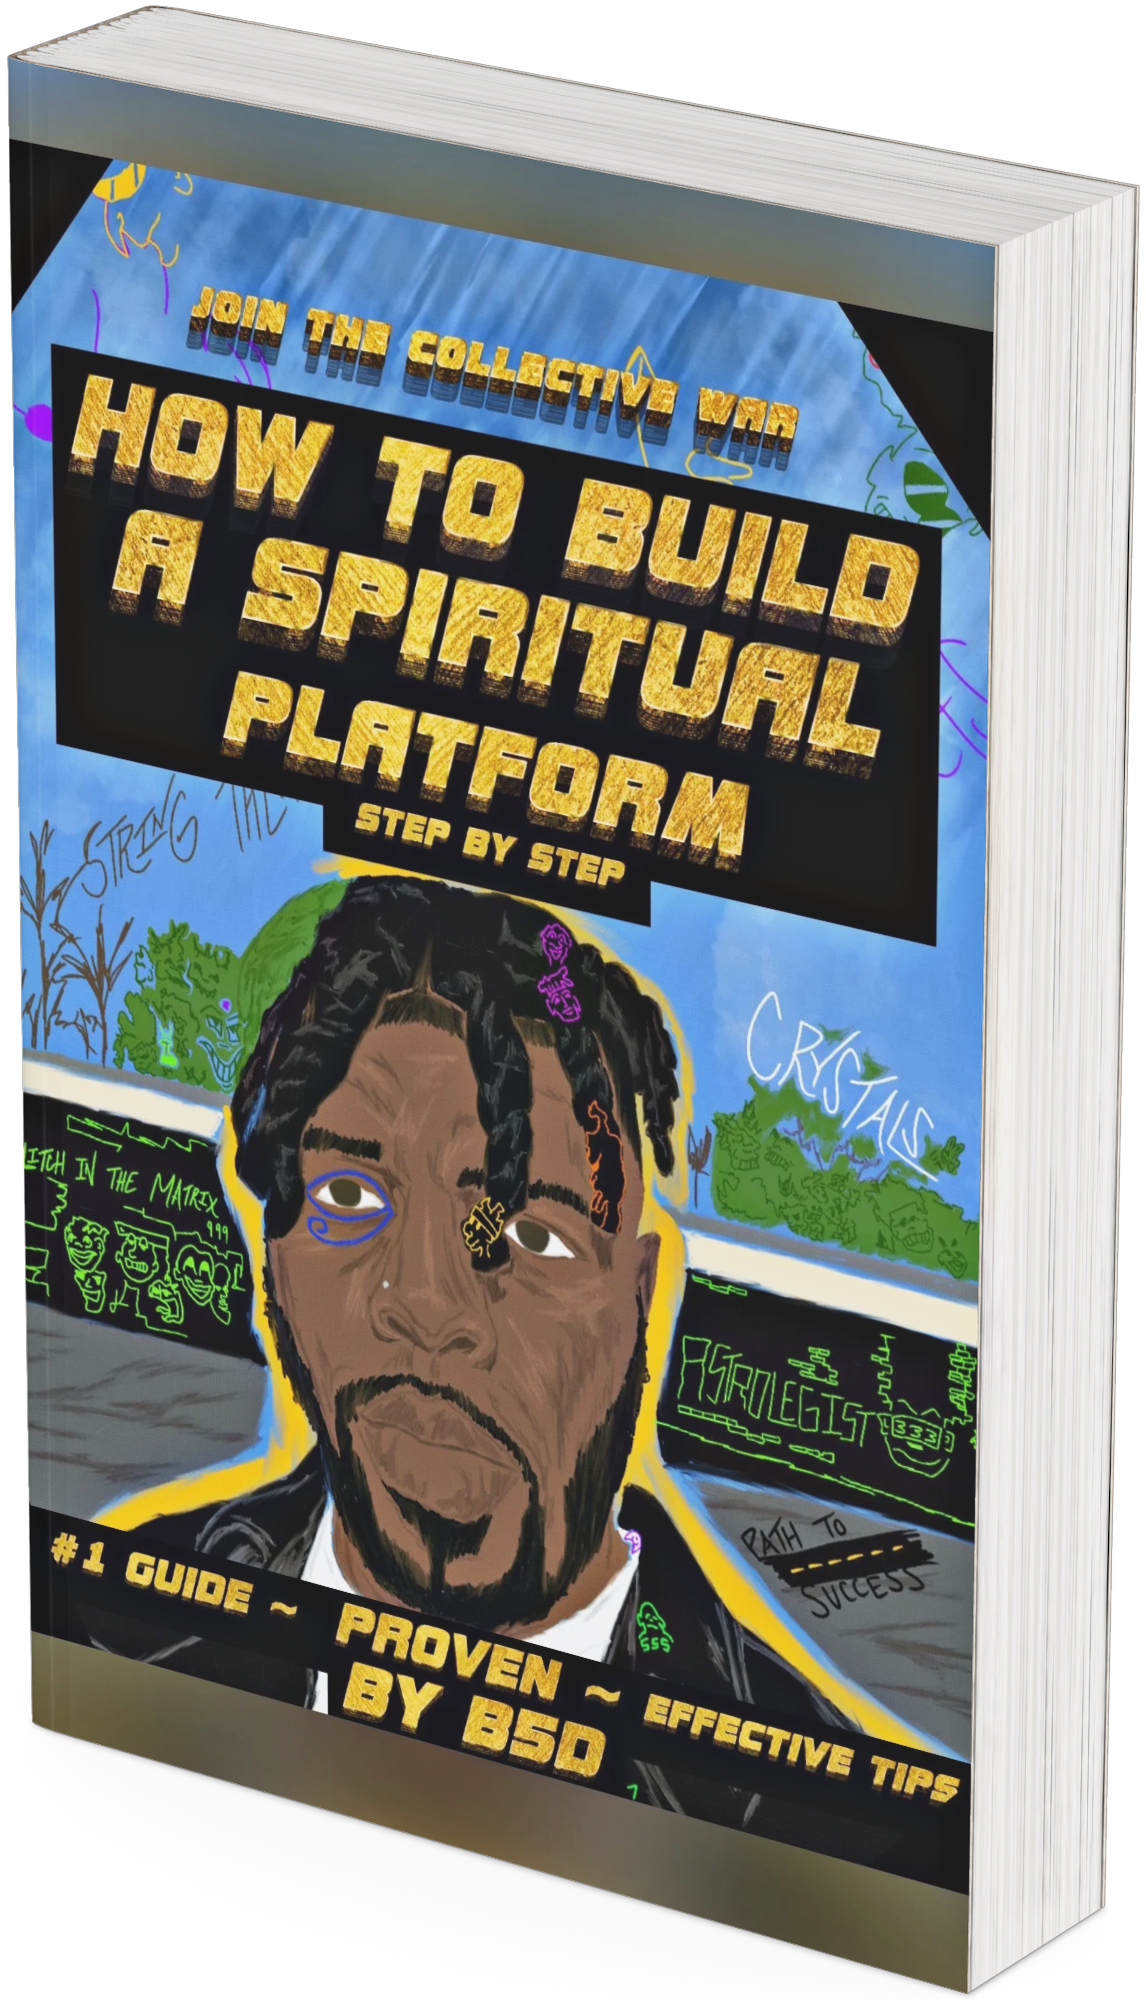 How To Build A Spiritual Platform -#1 Guide - Proven - Effective Tips